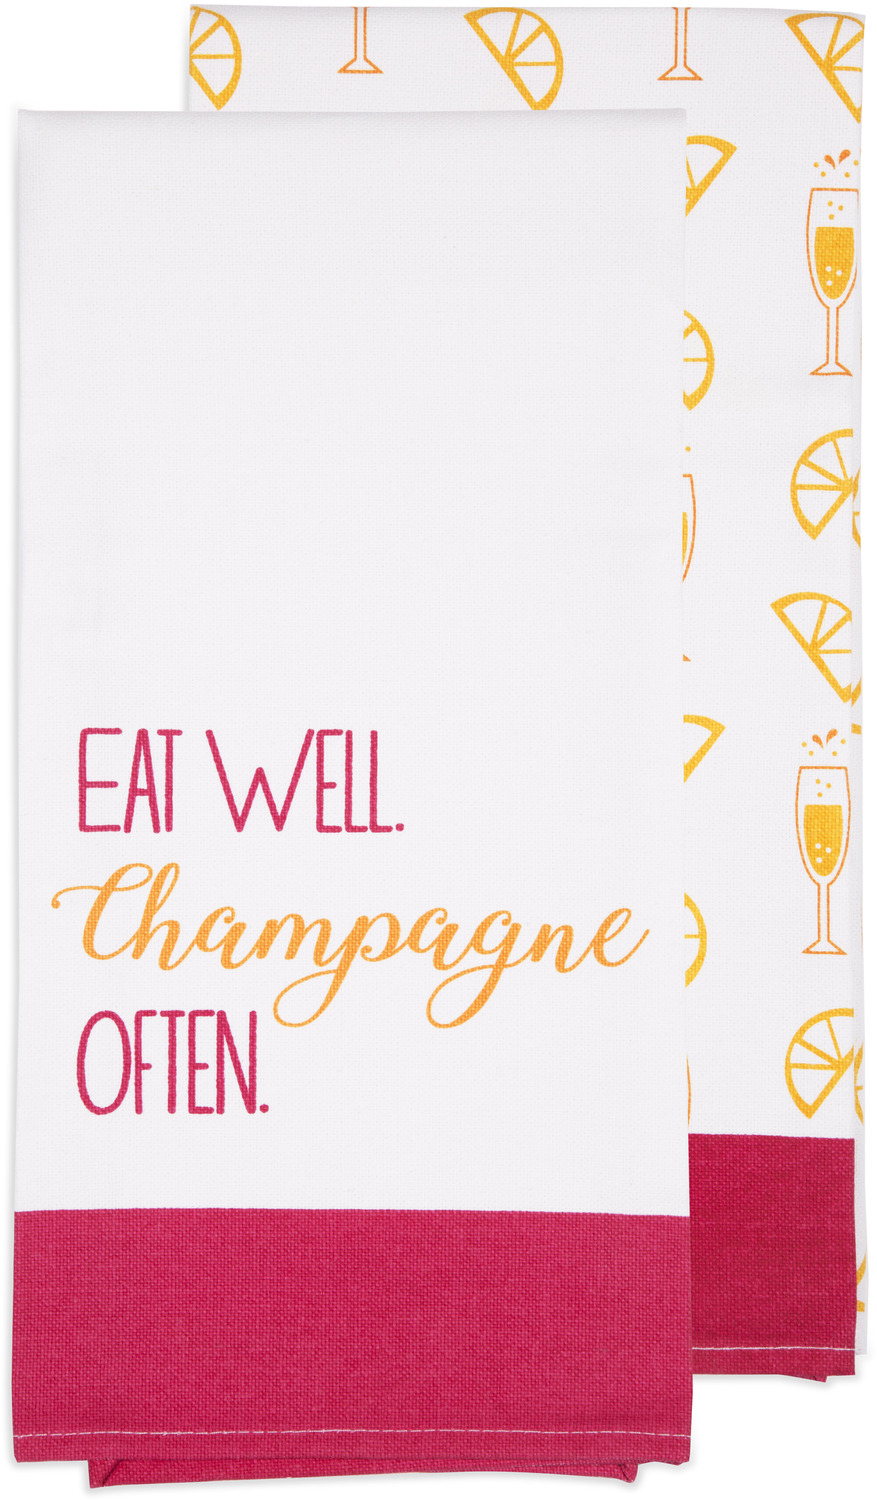 Champagne Often by Livin' on the Wedge - Champagne Often - Tea Towel Gift Set
(2 - 19.75" x 27.5")